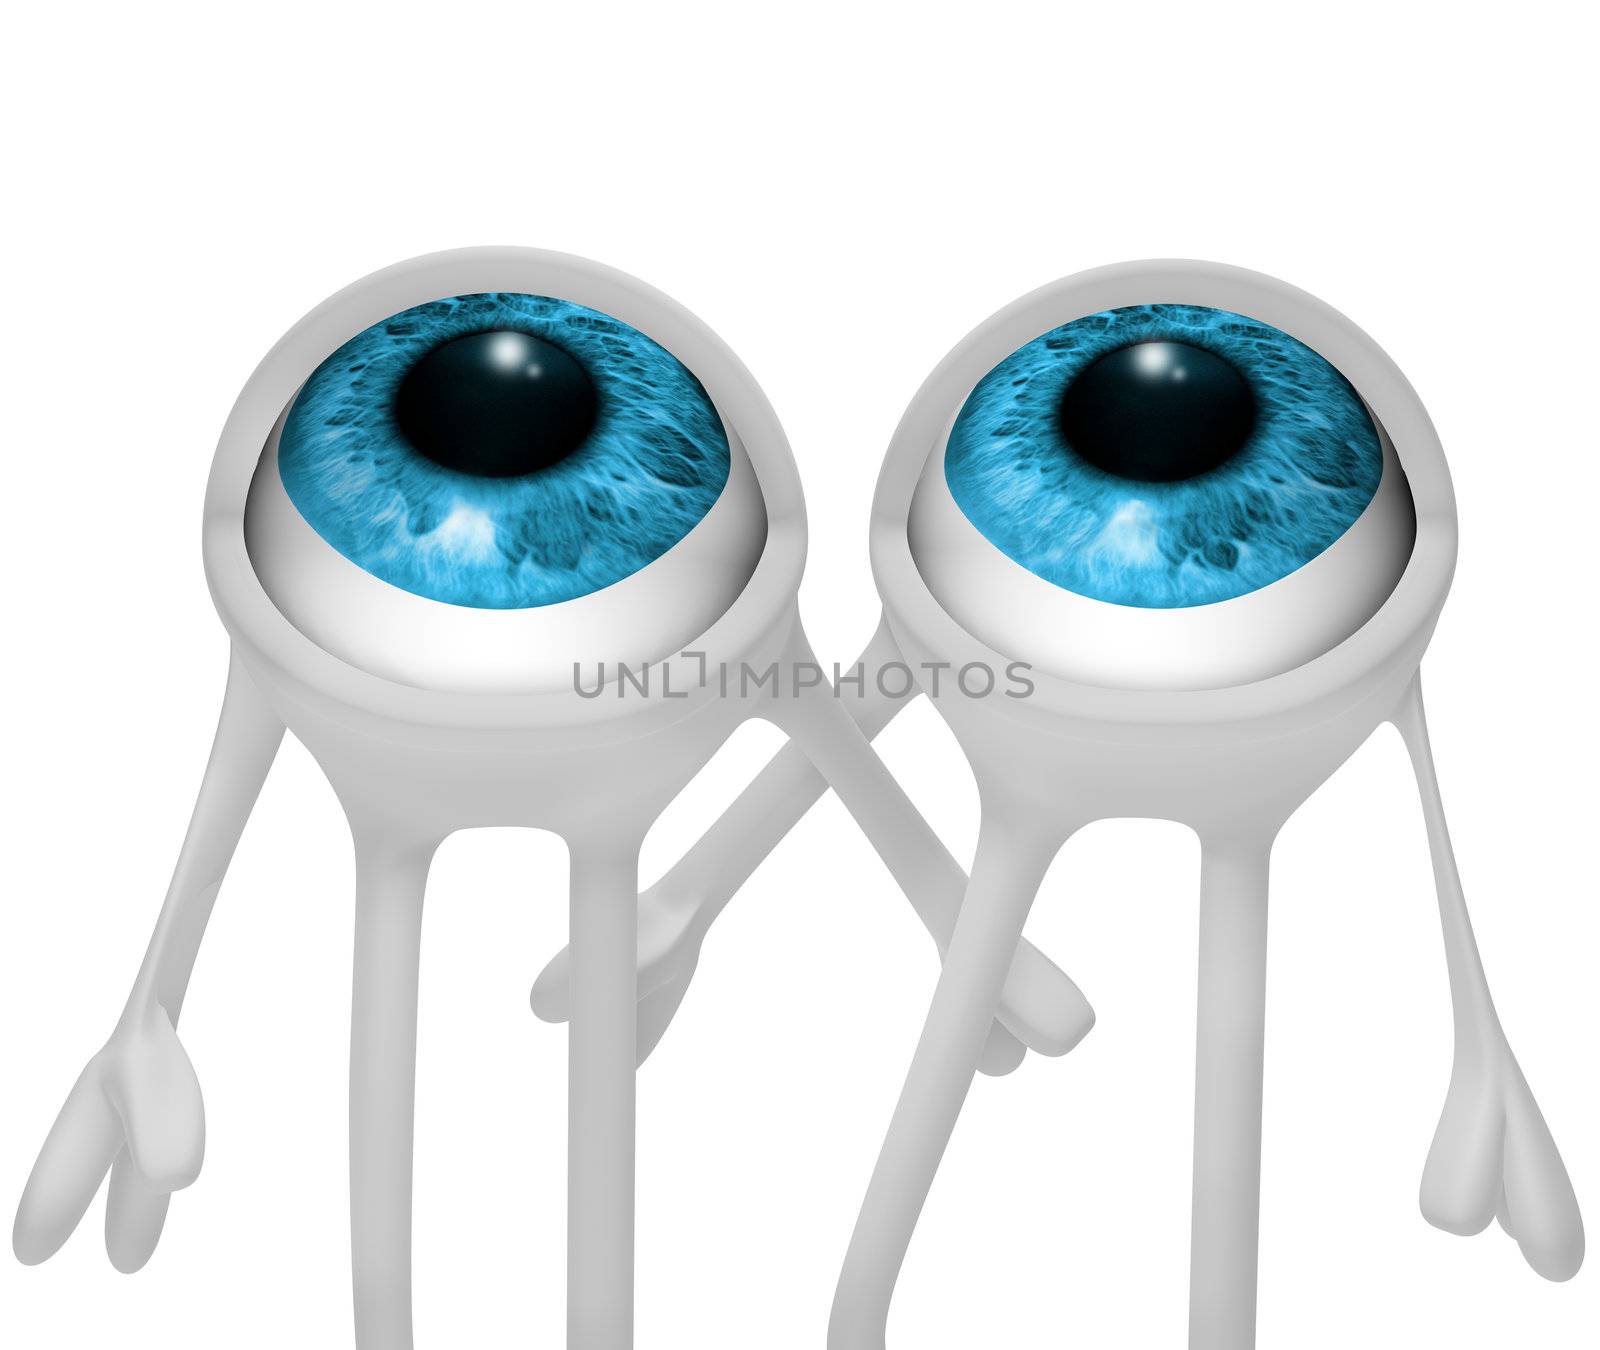 3d image of eyes looking up isolated in white